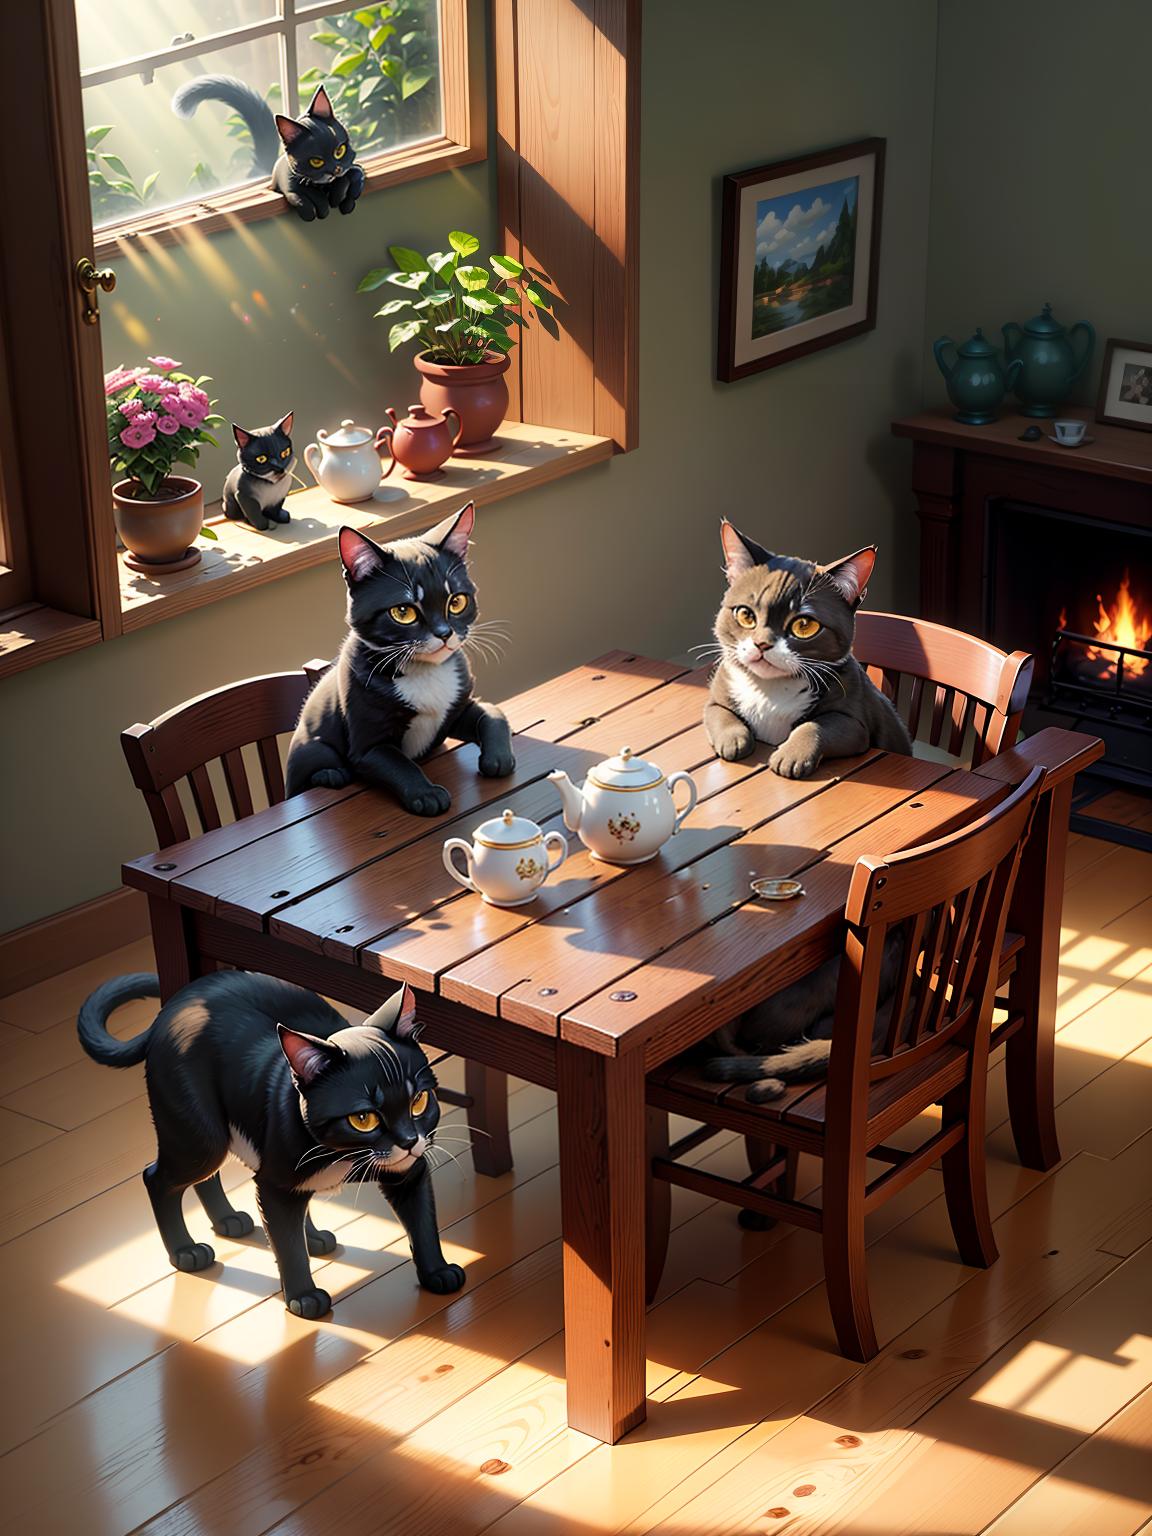  master piece, best quality, ultra detailed, highres, 4k.8k, Black cat., Engaging with other cats, showing unity., Friendly., BREAK A cat family teams up to show teamwork., In a cozy living room., Three pairs of boots, a table with a teapot and cups., BREAK Warm and inviting., Sunlight streaming through a window, illuminating the scene., fun00d